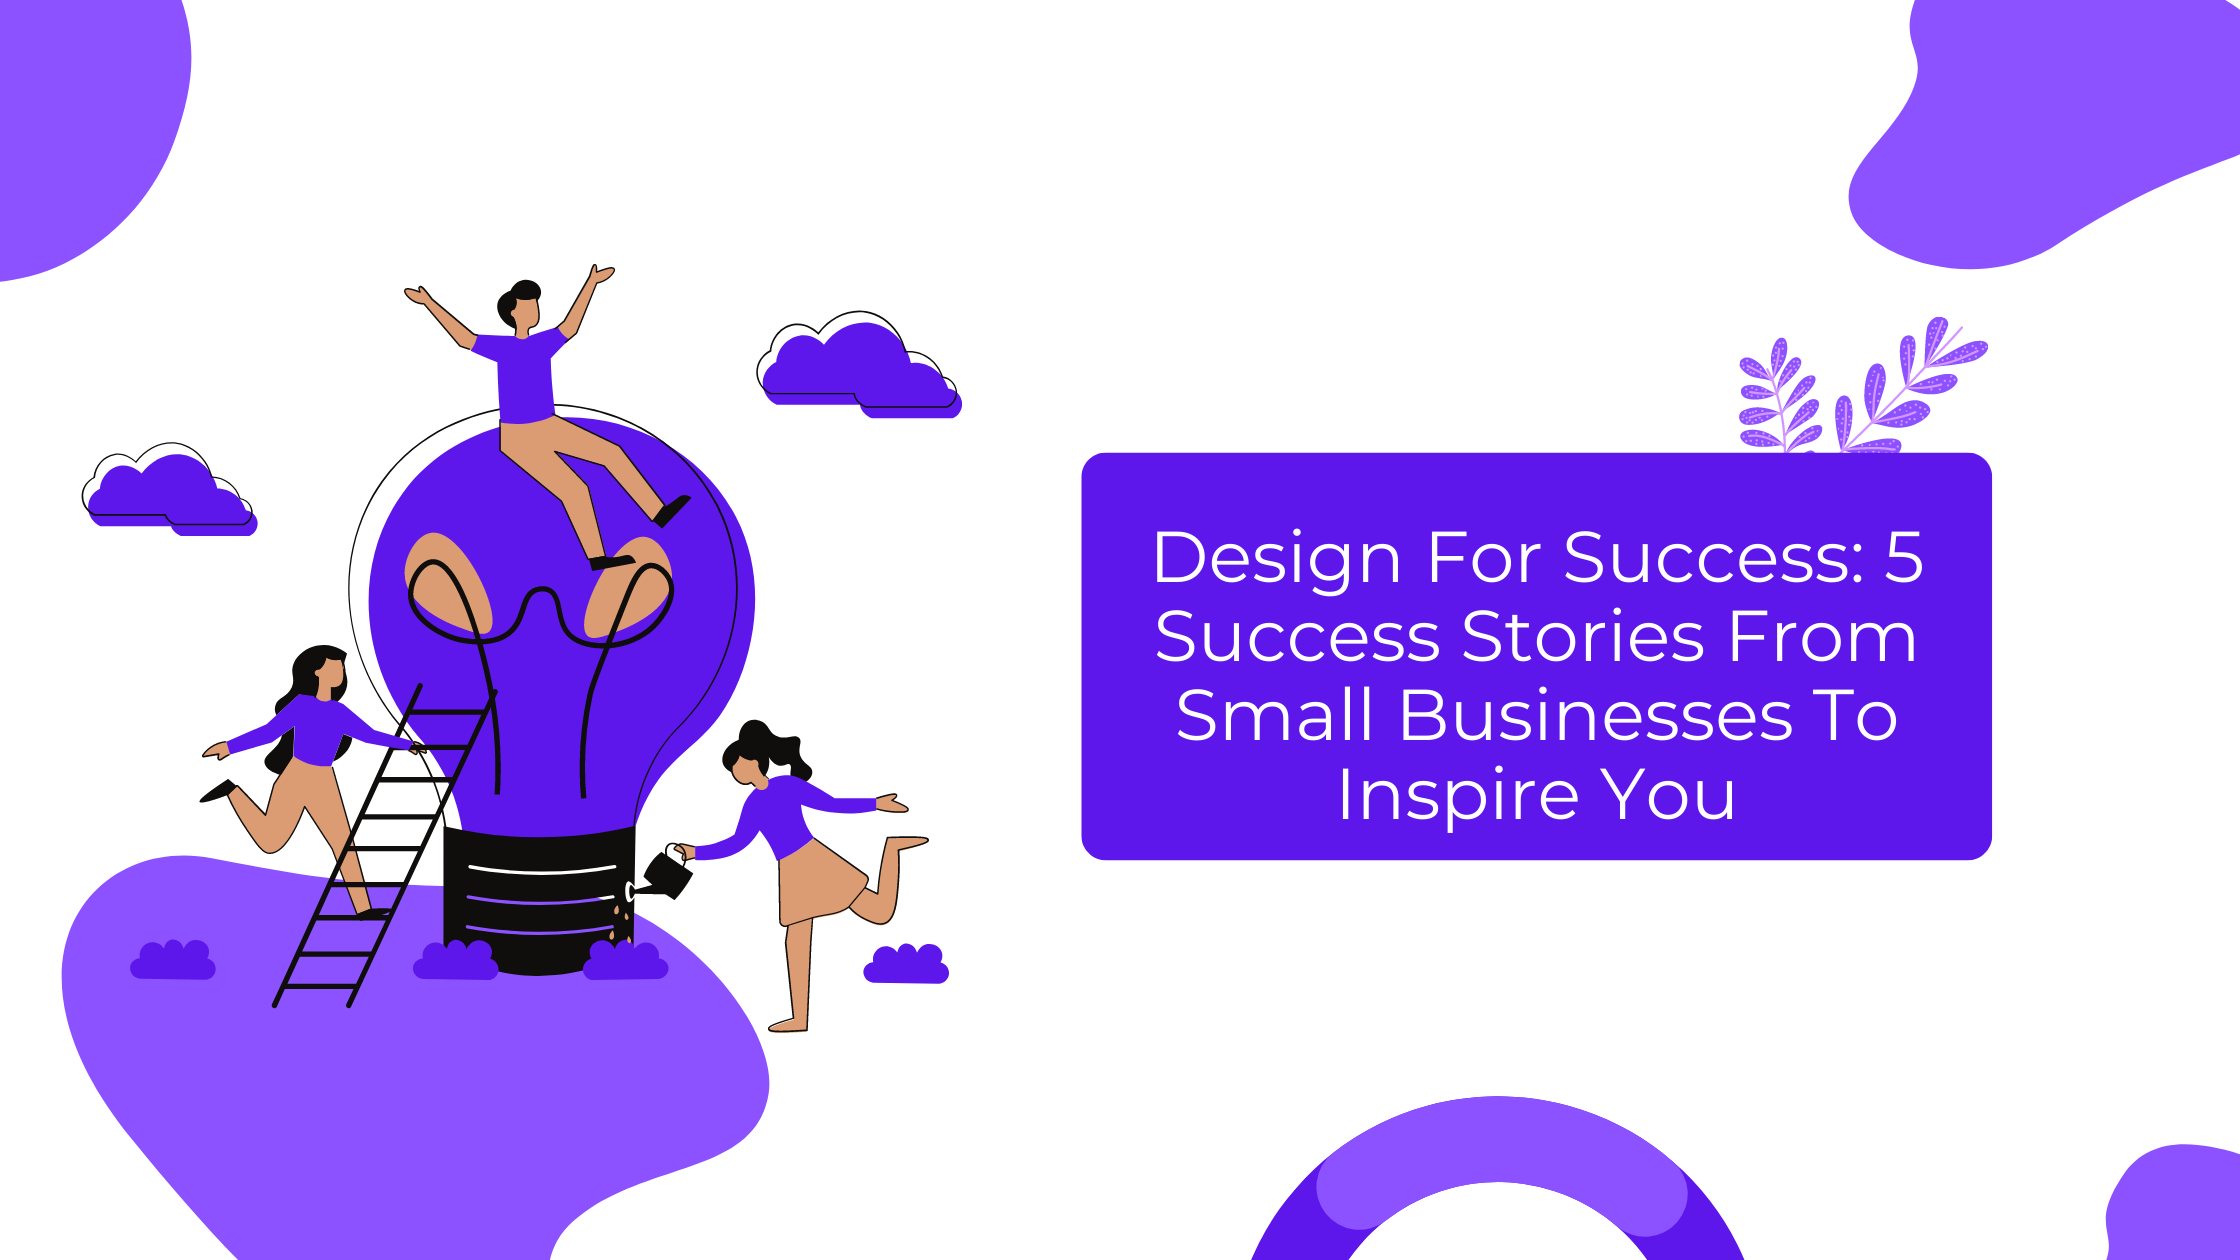 Design For Success 5 Success Stories From Small Businesses To Inspire You